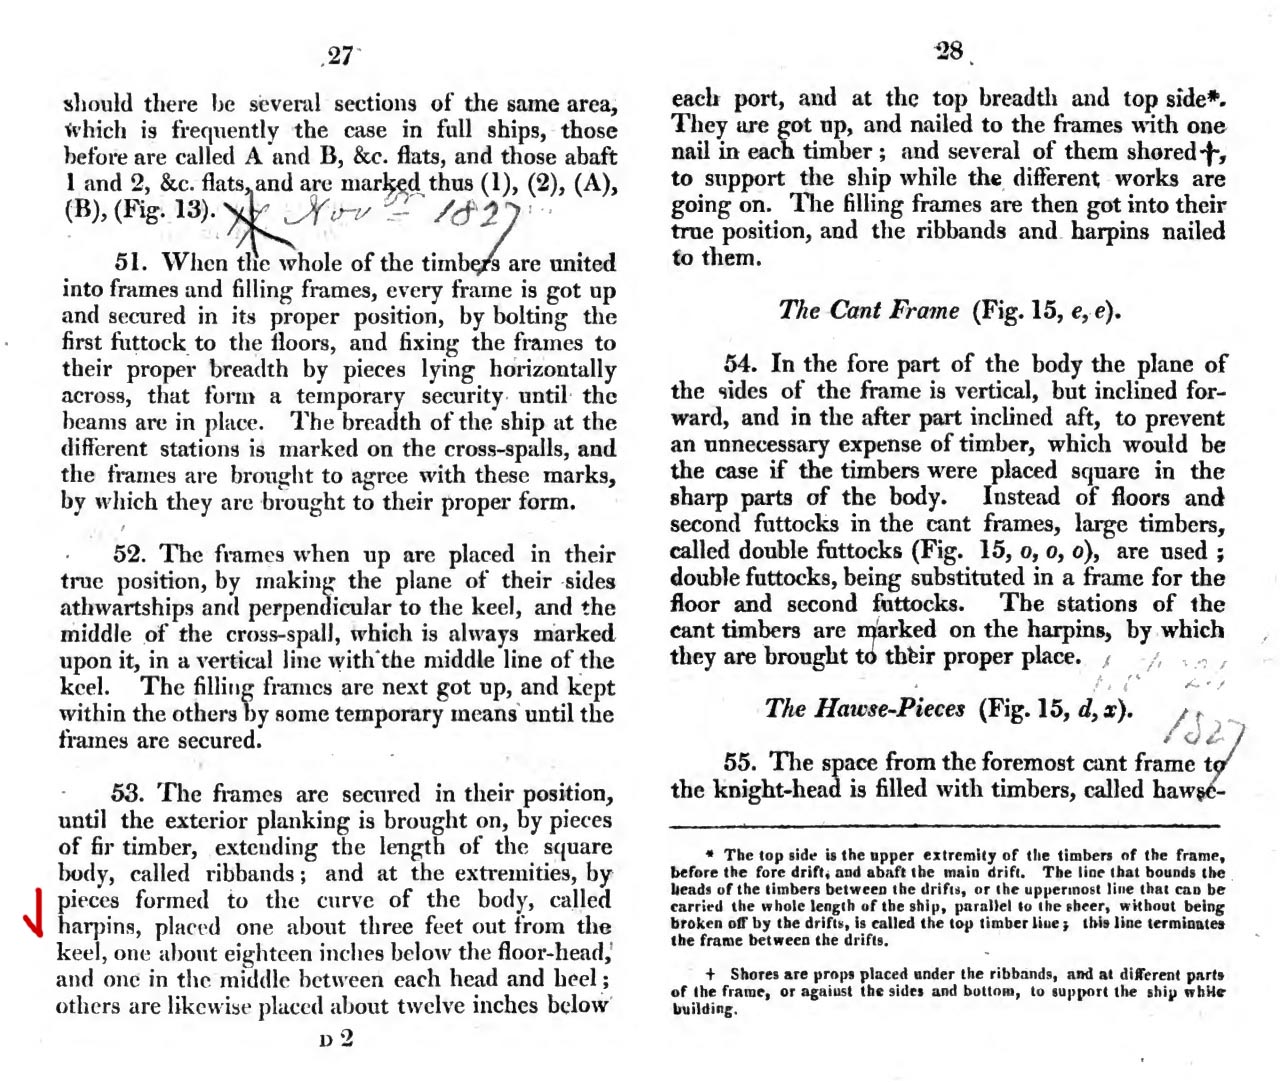 pp27-28 Fincham An introductory outline of the practice of Ship-Building 1825.jpg